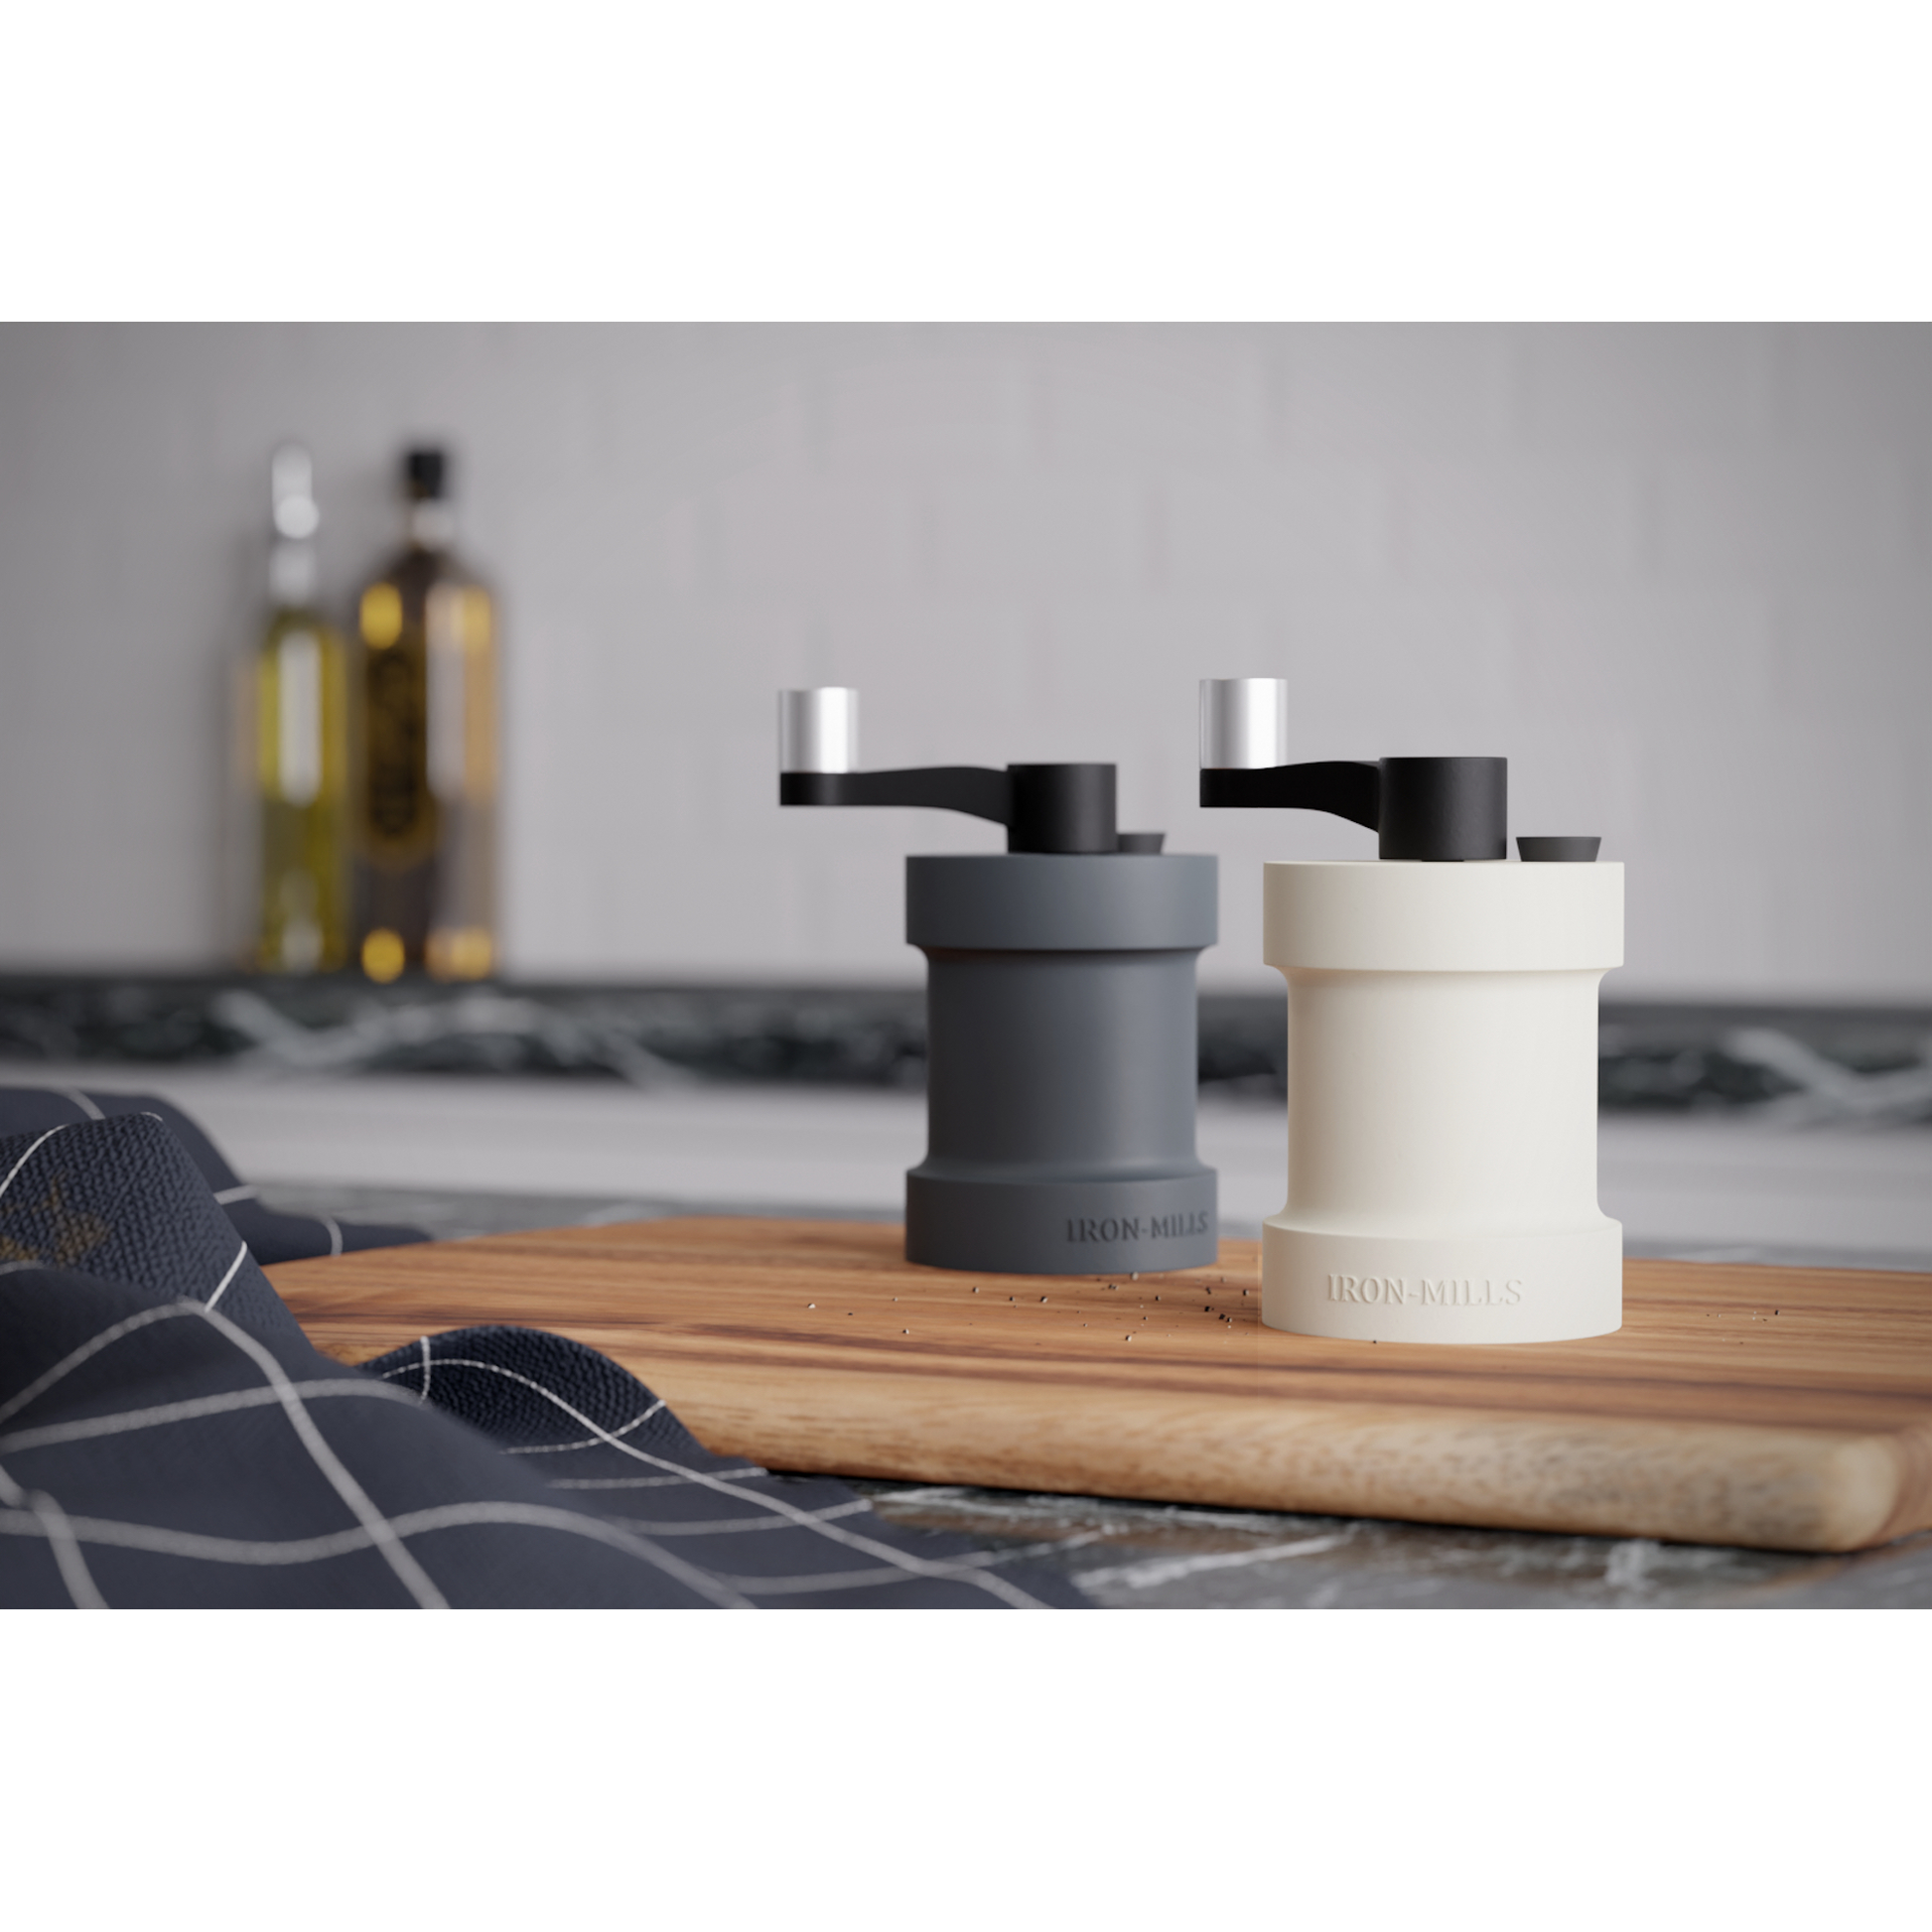 Anthracite Grey & Oyster White Cast Iron Crank Handle Salt and Pepper Mill Set